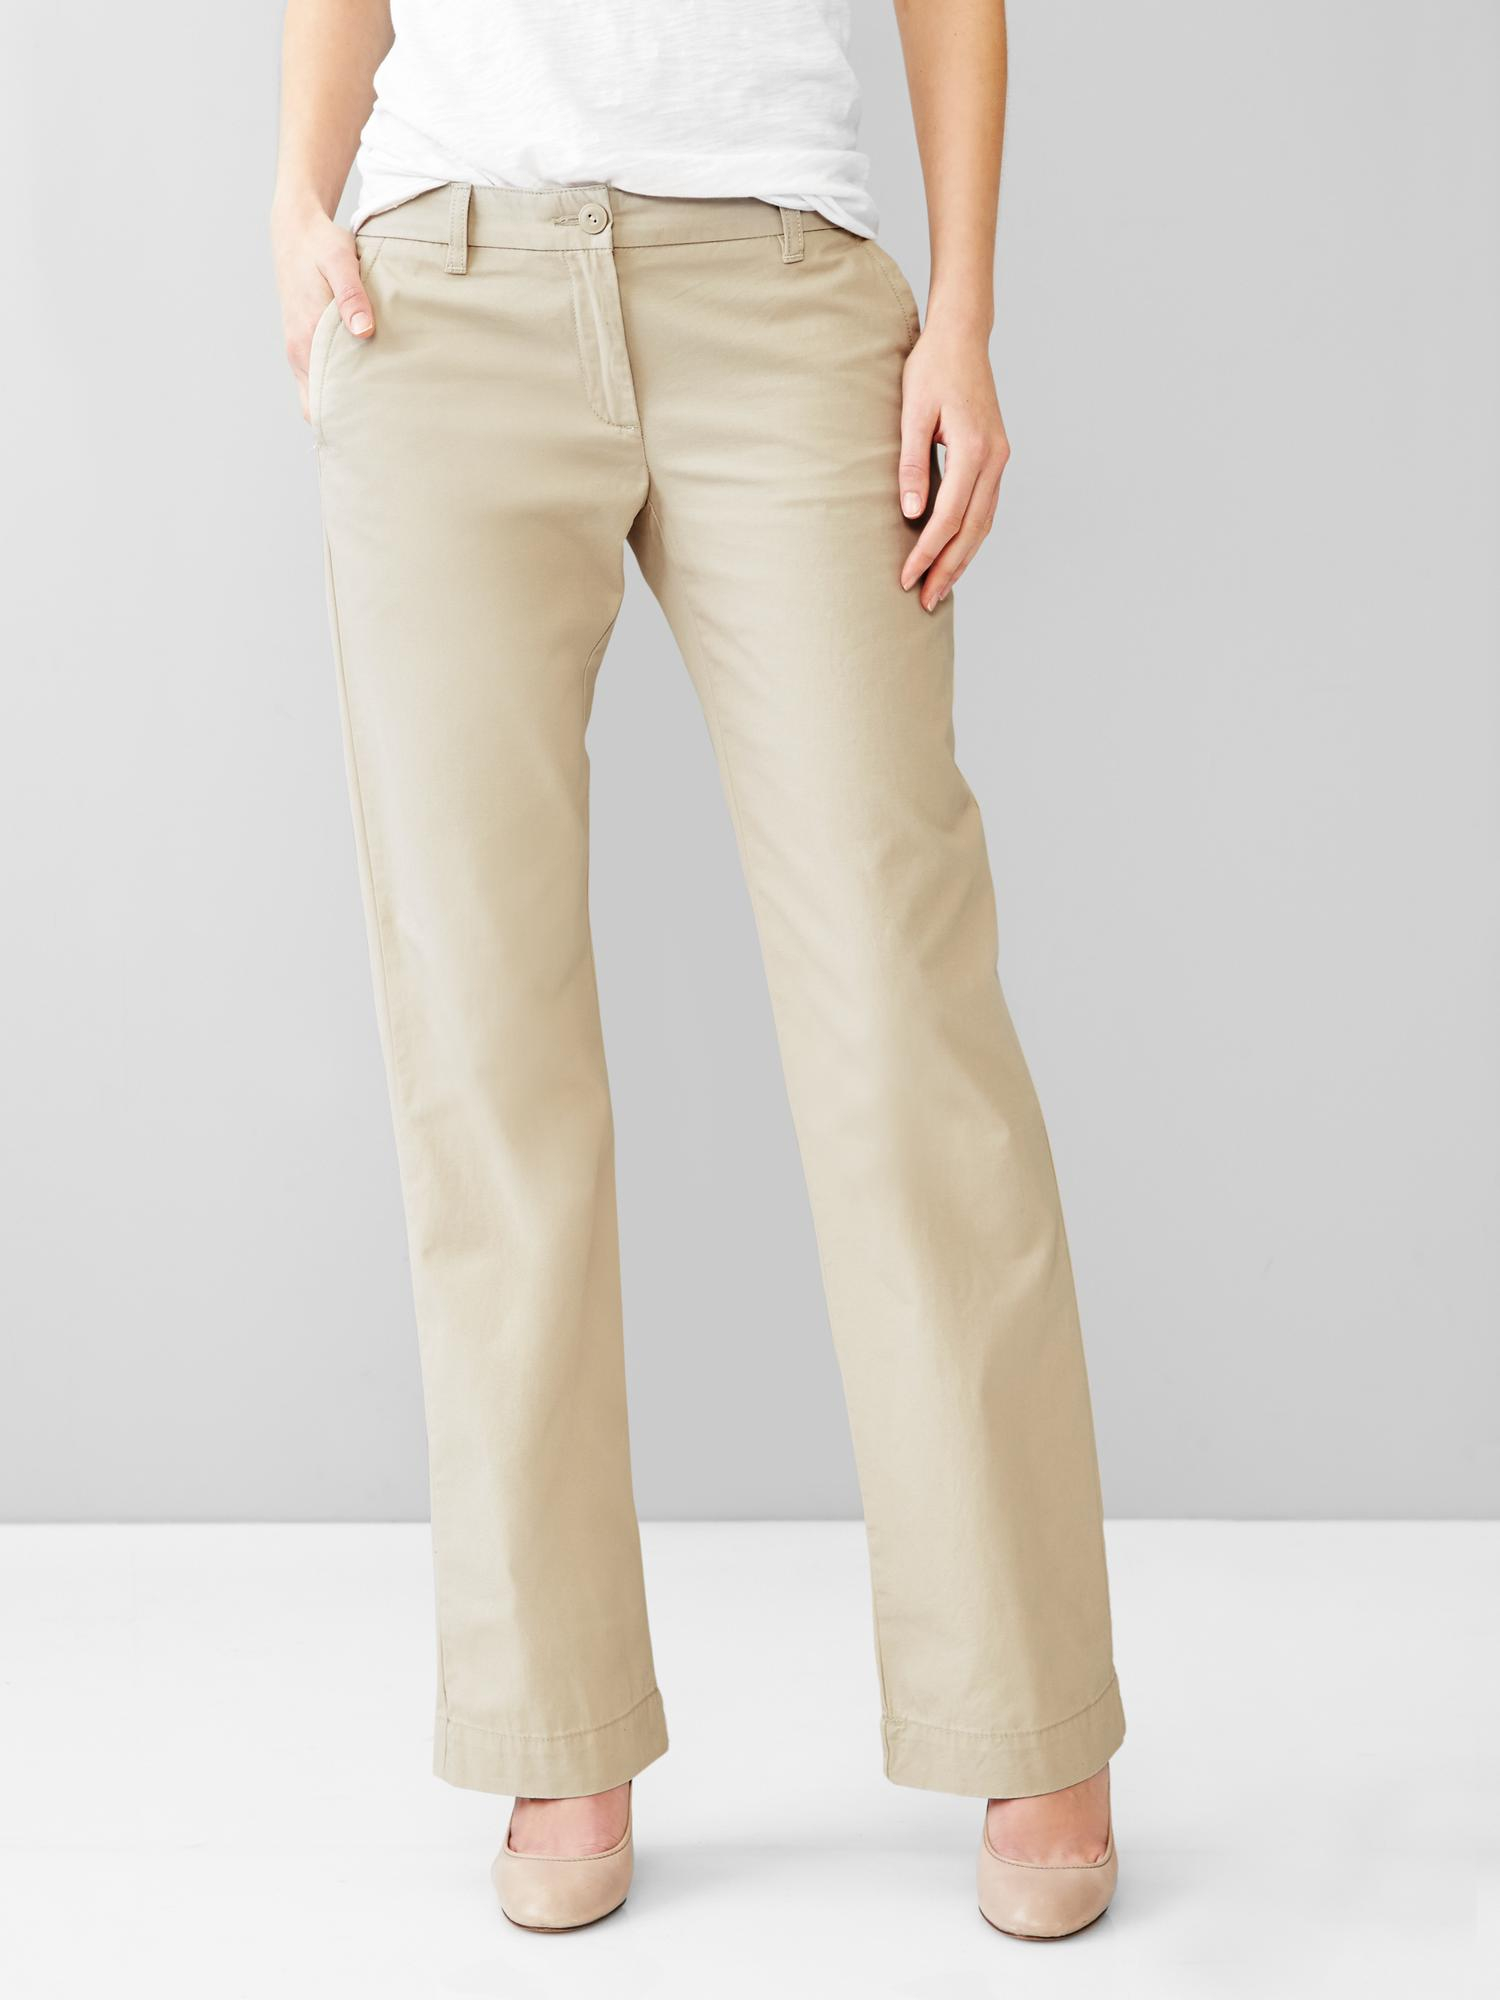 View 20 Banana Republic Pants Womens - quoteqterms